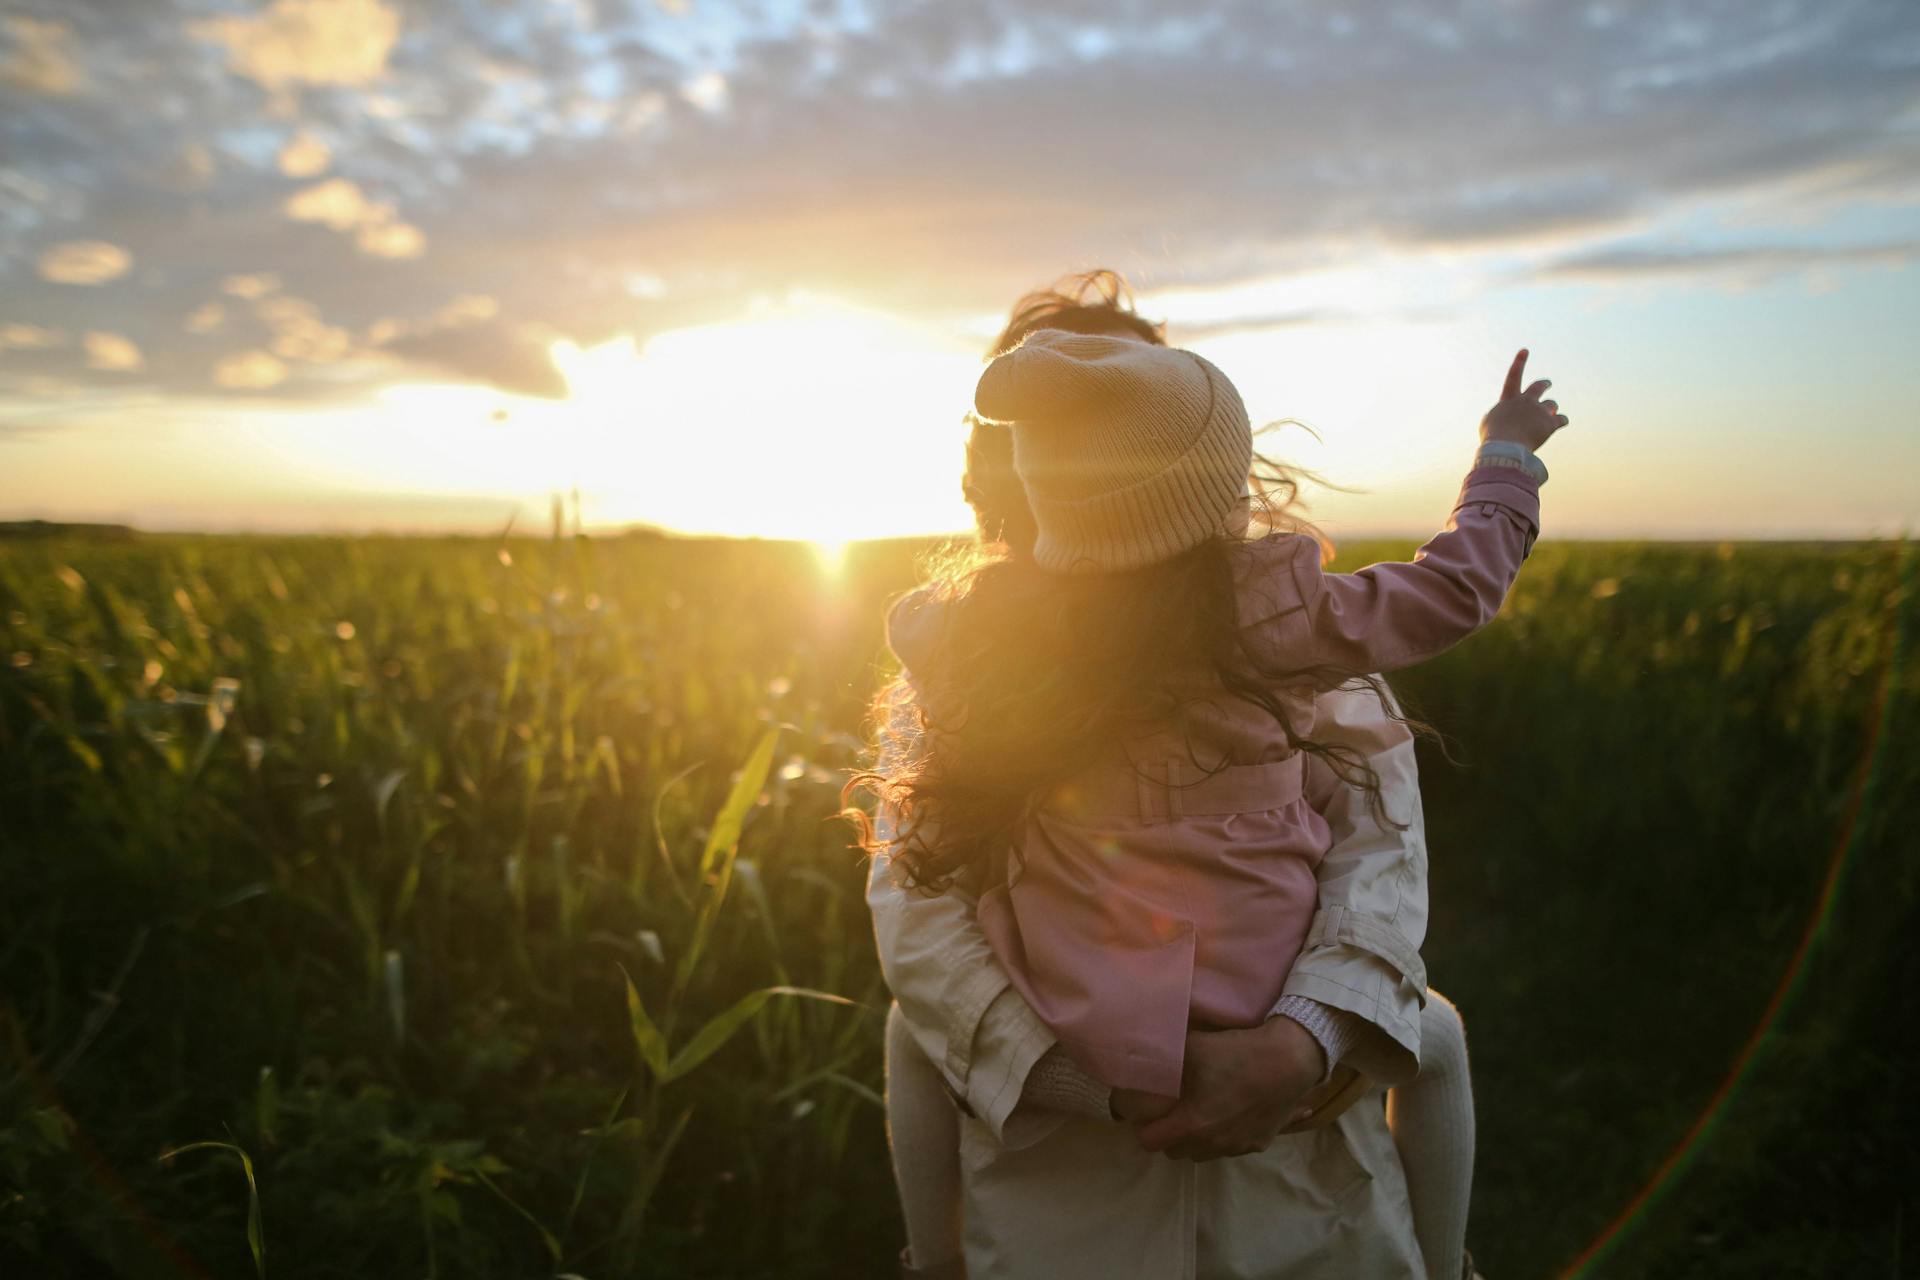 A mother-daughter duo in a grassy field | Source: Pexels